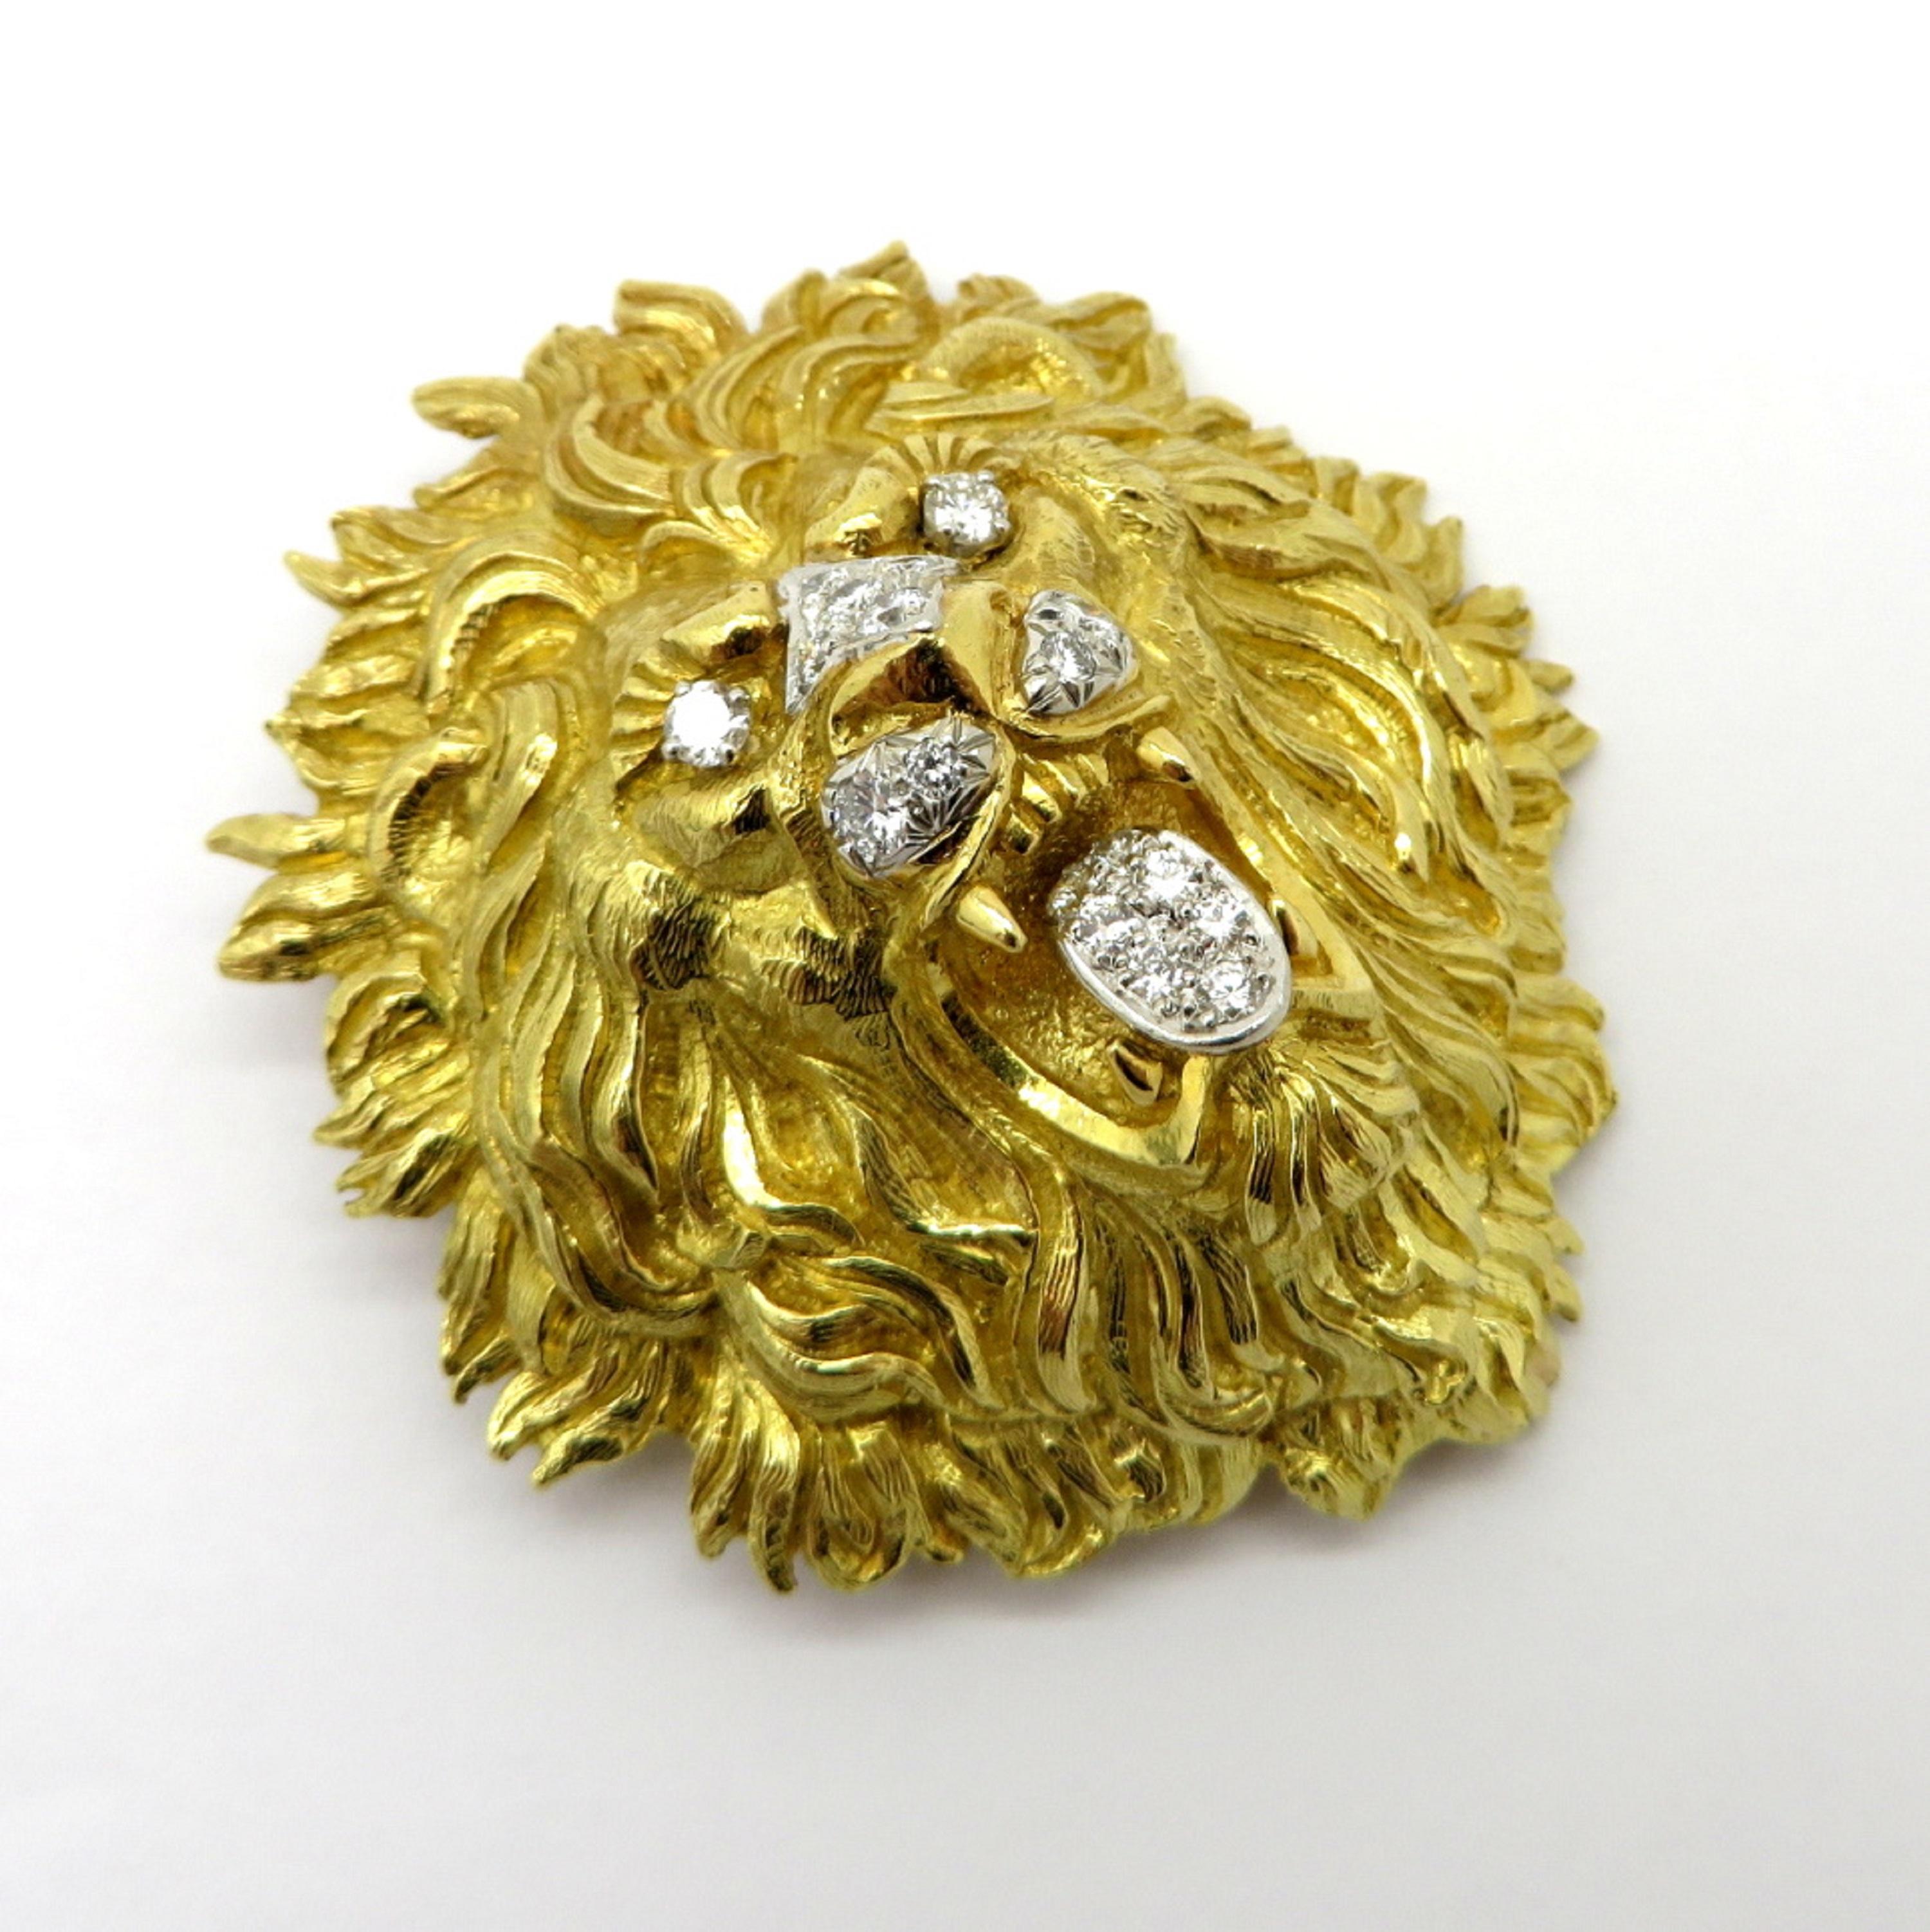 Estate designer David Webb 18K yellow gold and platinum diamond lion brooch/pendant. Interspersed with numerous round brilliant cut diamonds, prong set, weighing approximately 1.25 carats. Diamond grading: color grade: F. Clarity grade: VS1. The